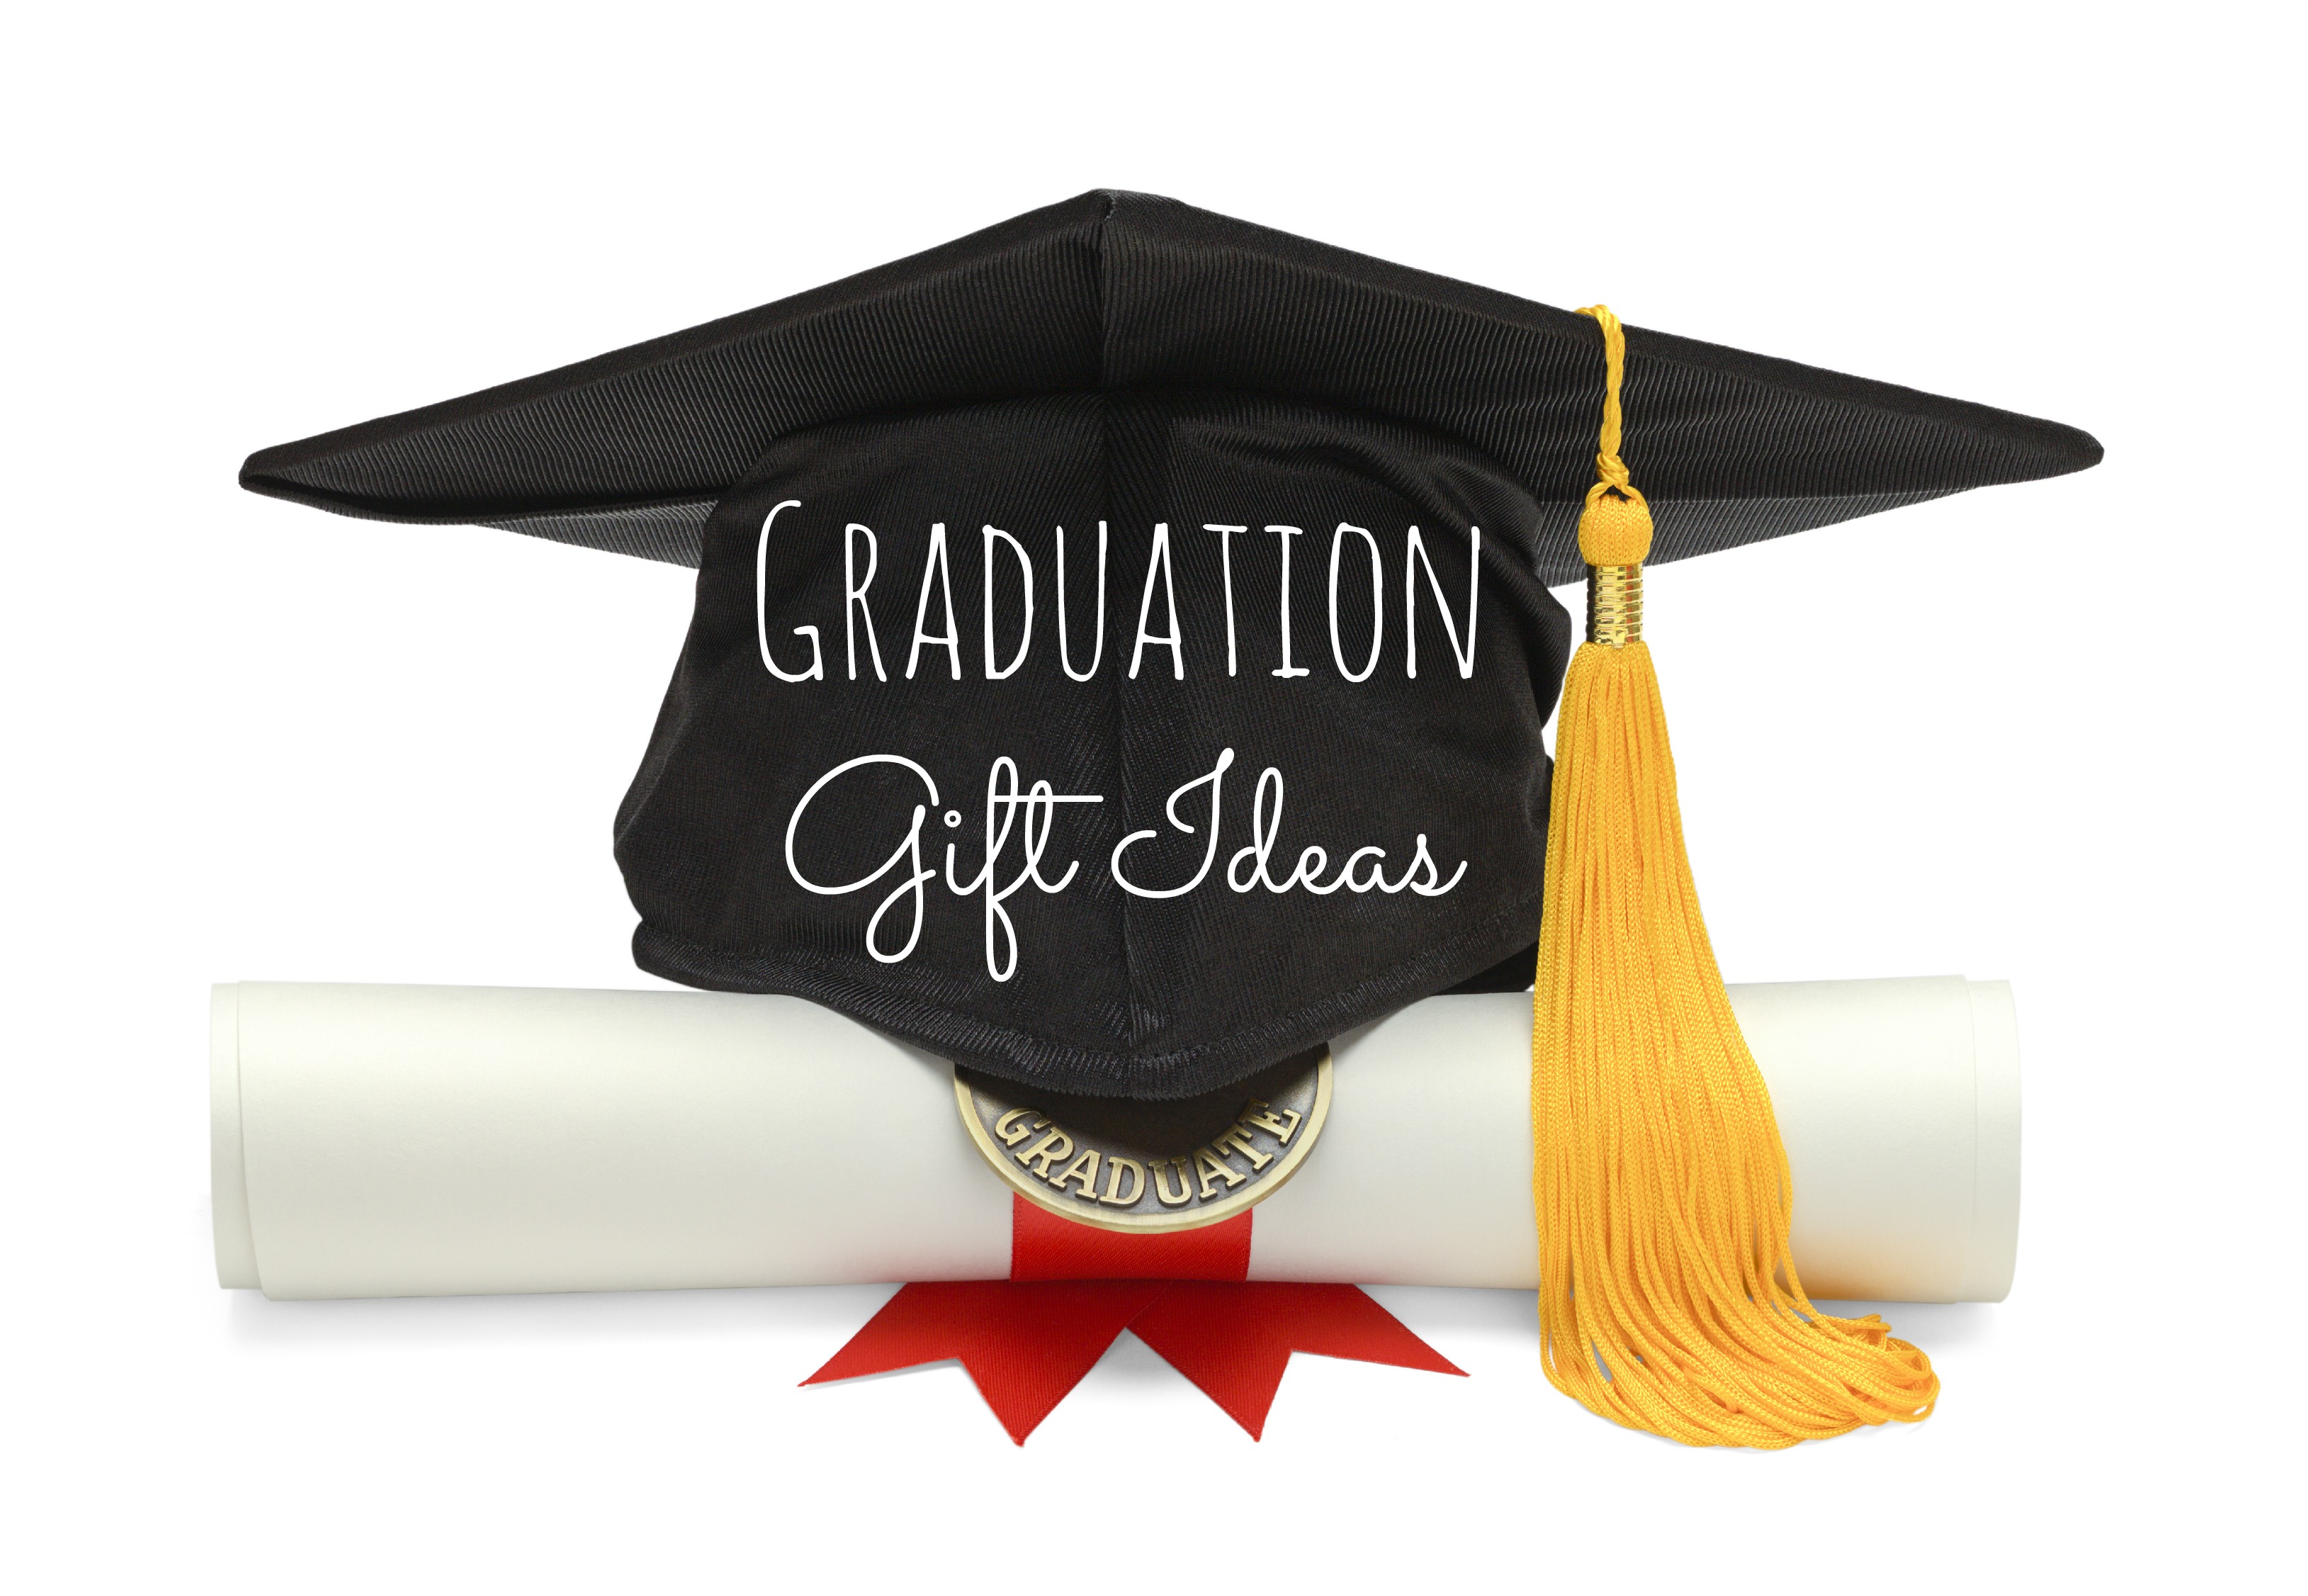 Graduation Gifts that are Useful at College - Useful DIY Projects